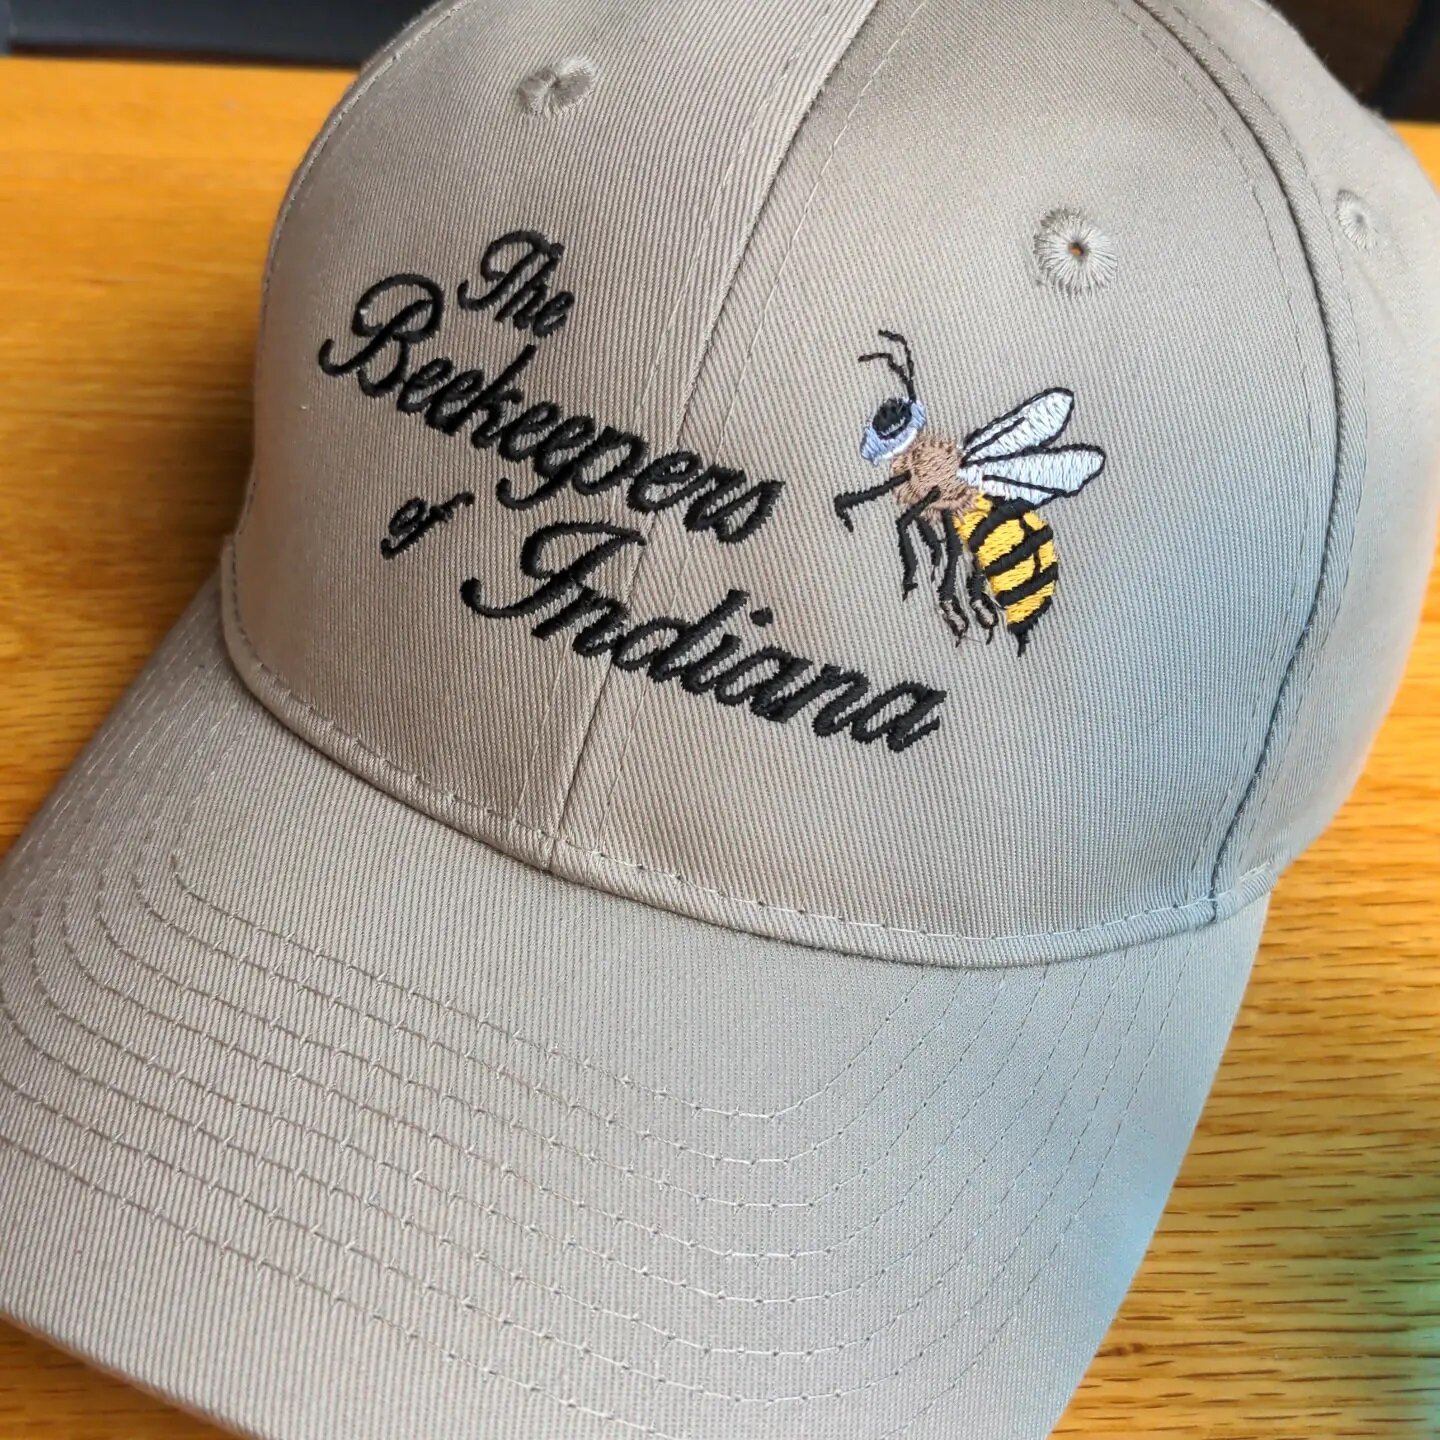 We have some nice swag here in Indiana. I may now have a near-complete TBoI wardrobe. 

#beekeeping  #indiana #swag #purdue